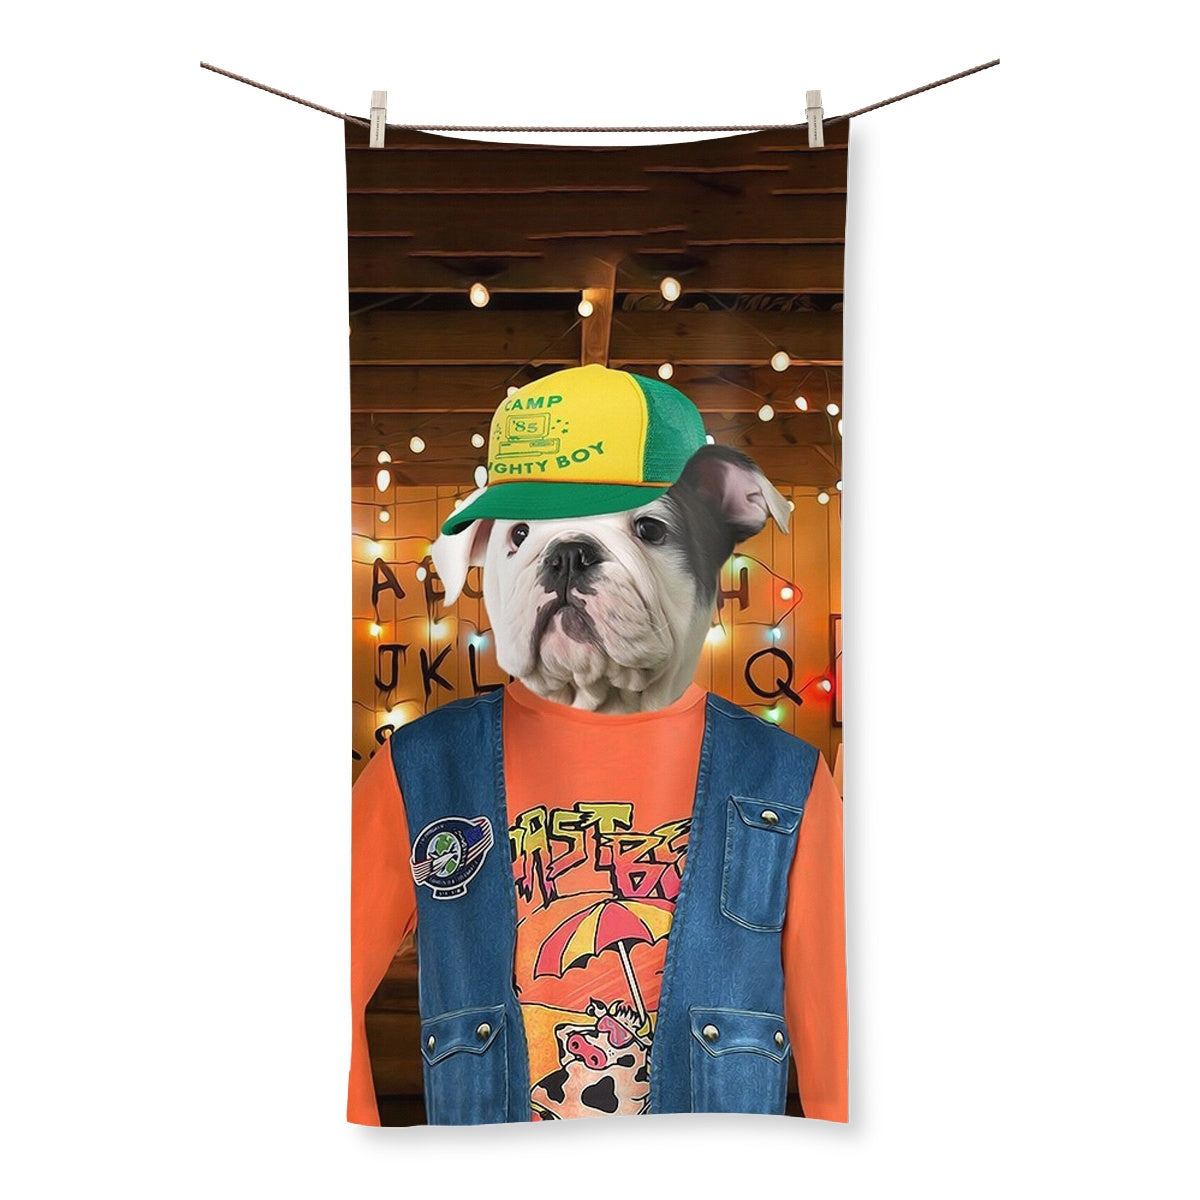 The Dustin (Stranger Things Inspired) Paw & Glory, paw and glory, pet throw blankets, personalized dog head blanket, dog printed blanket, pet blanket custom, pet photo on blanket, pet art dog head blanket, Pet Portrait blanket